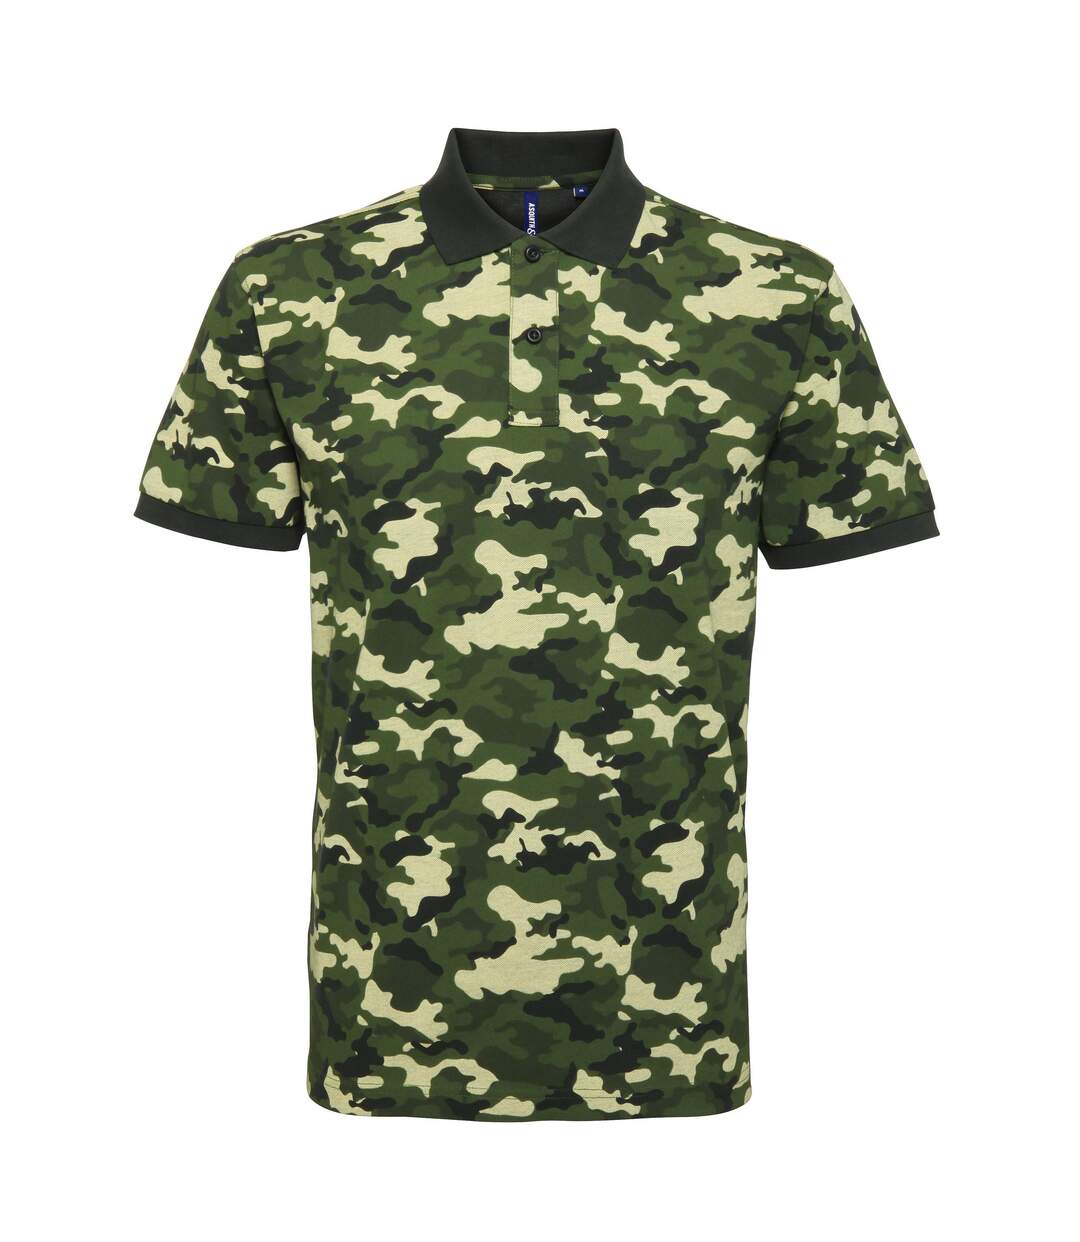 Asquith & Fox - Polo à motif camouflage - Homme (Vert camouflage) - UTRW5351